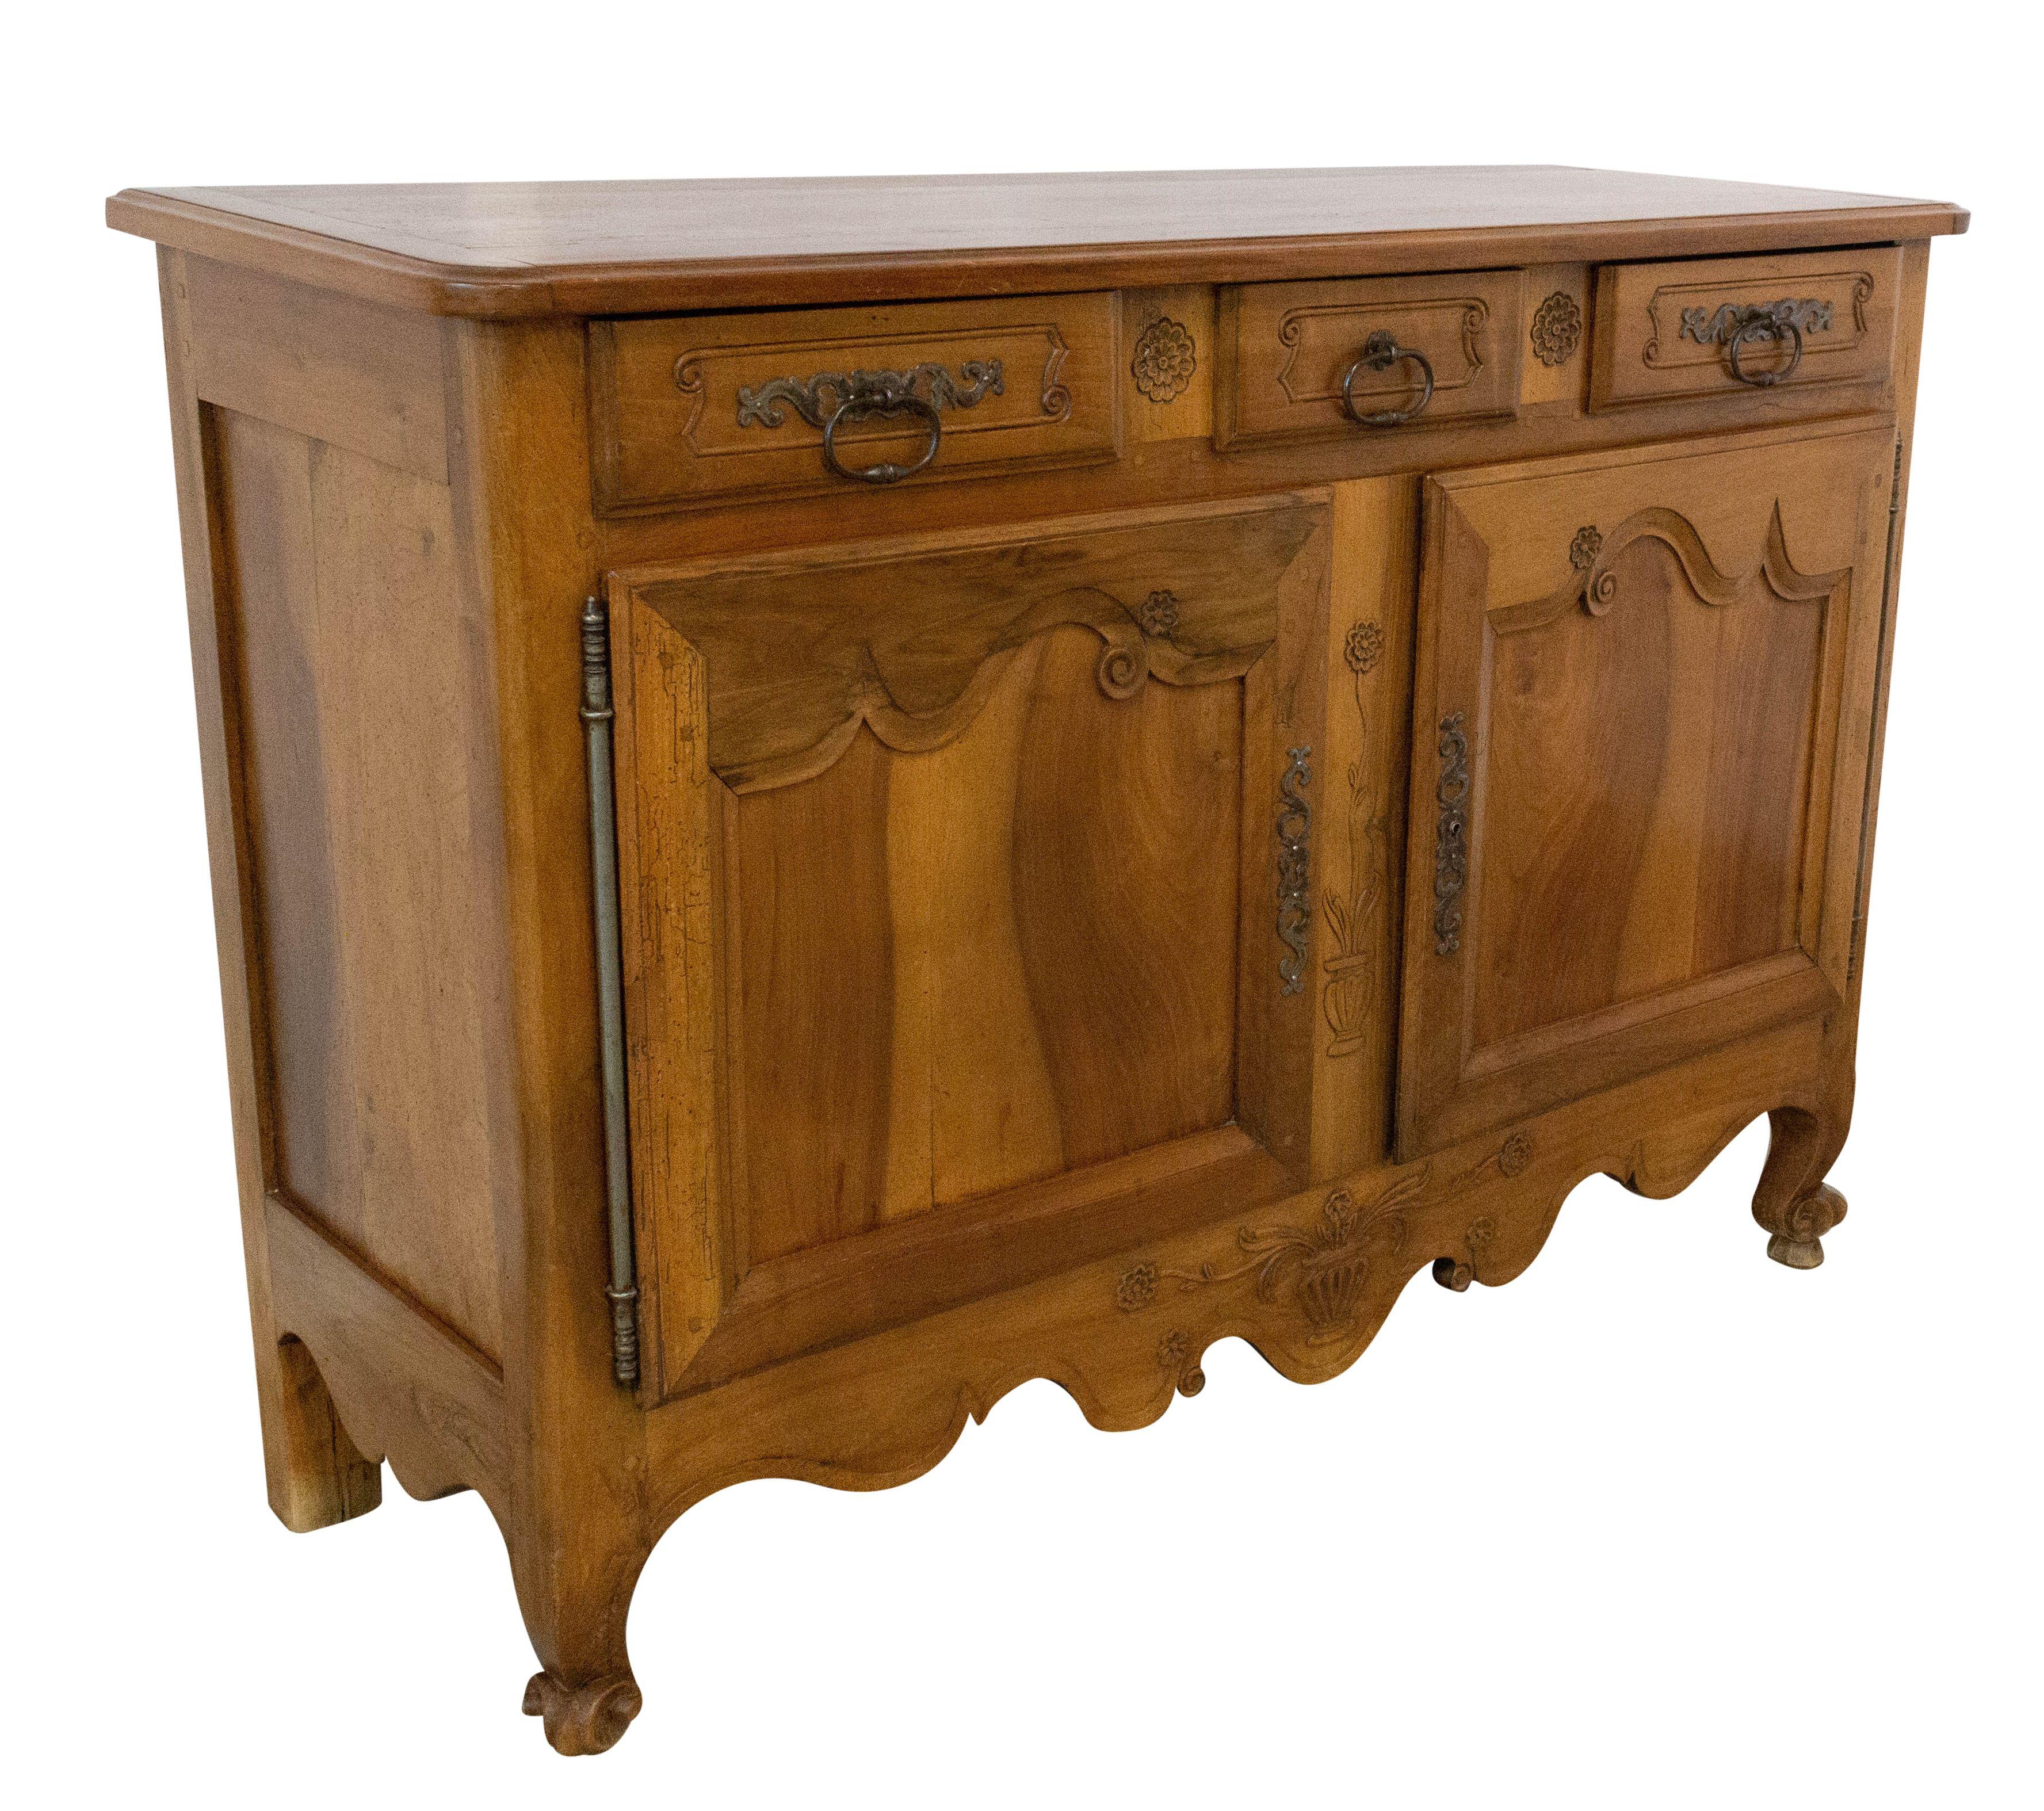 Antique carved walnut Louis XV style buffet hand carved French sideboard dresser, 19th century
Carved floral motifs typical of Louis XV furniture
Three drawers
Superb patina
Very good condition for its age.
 